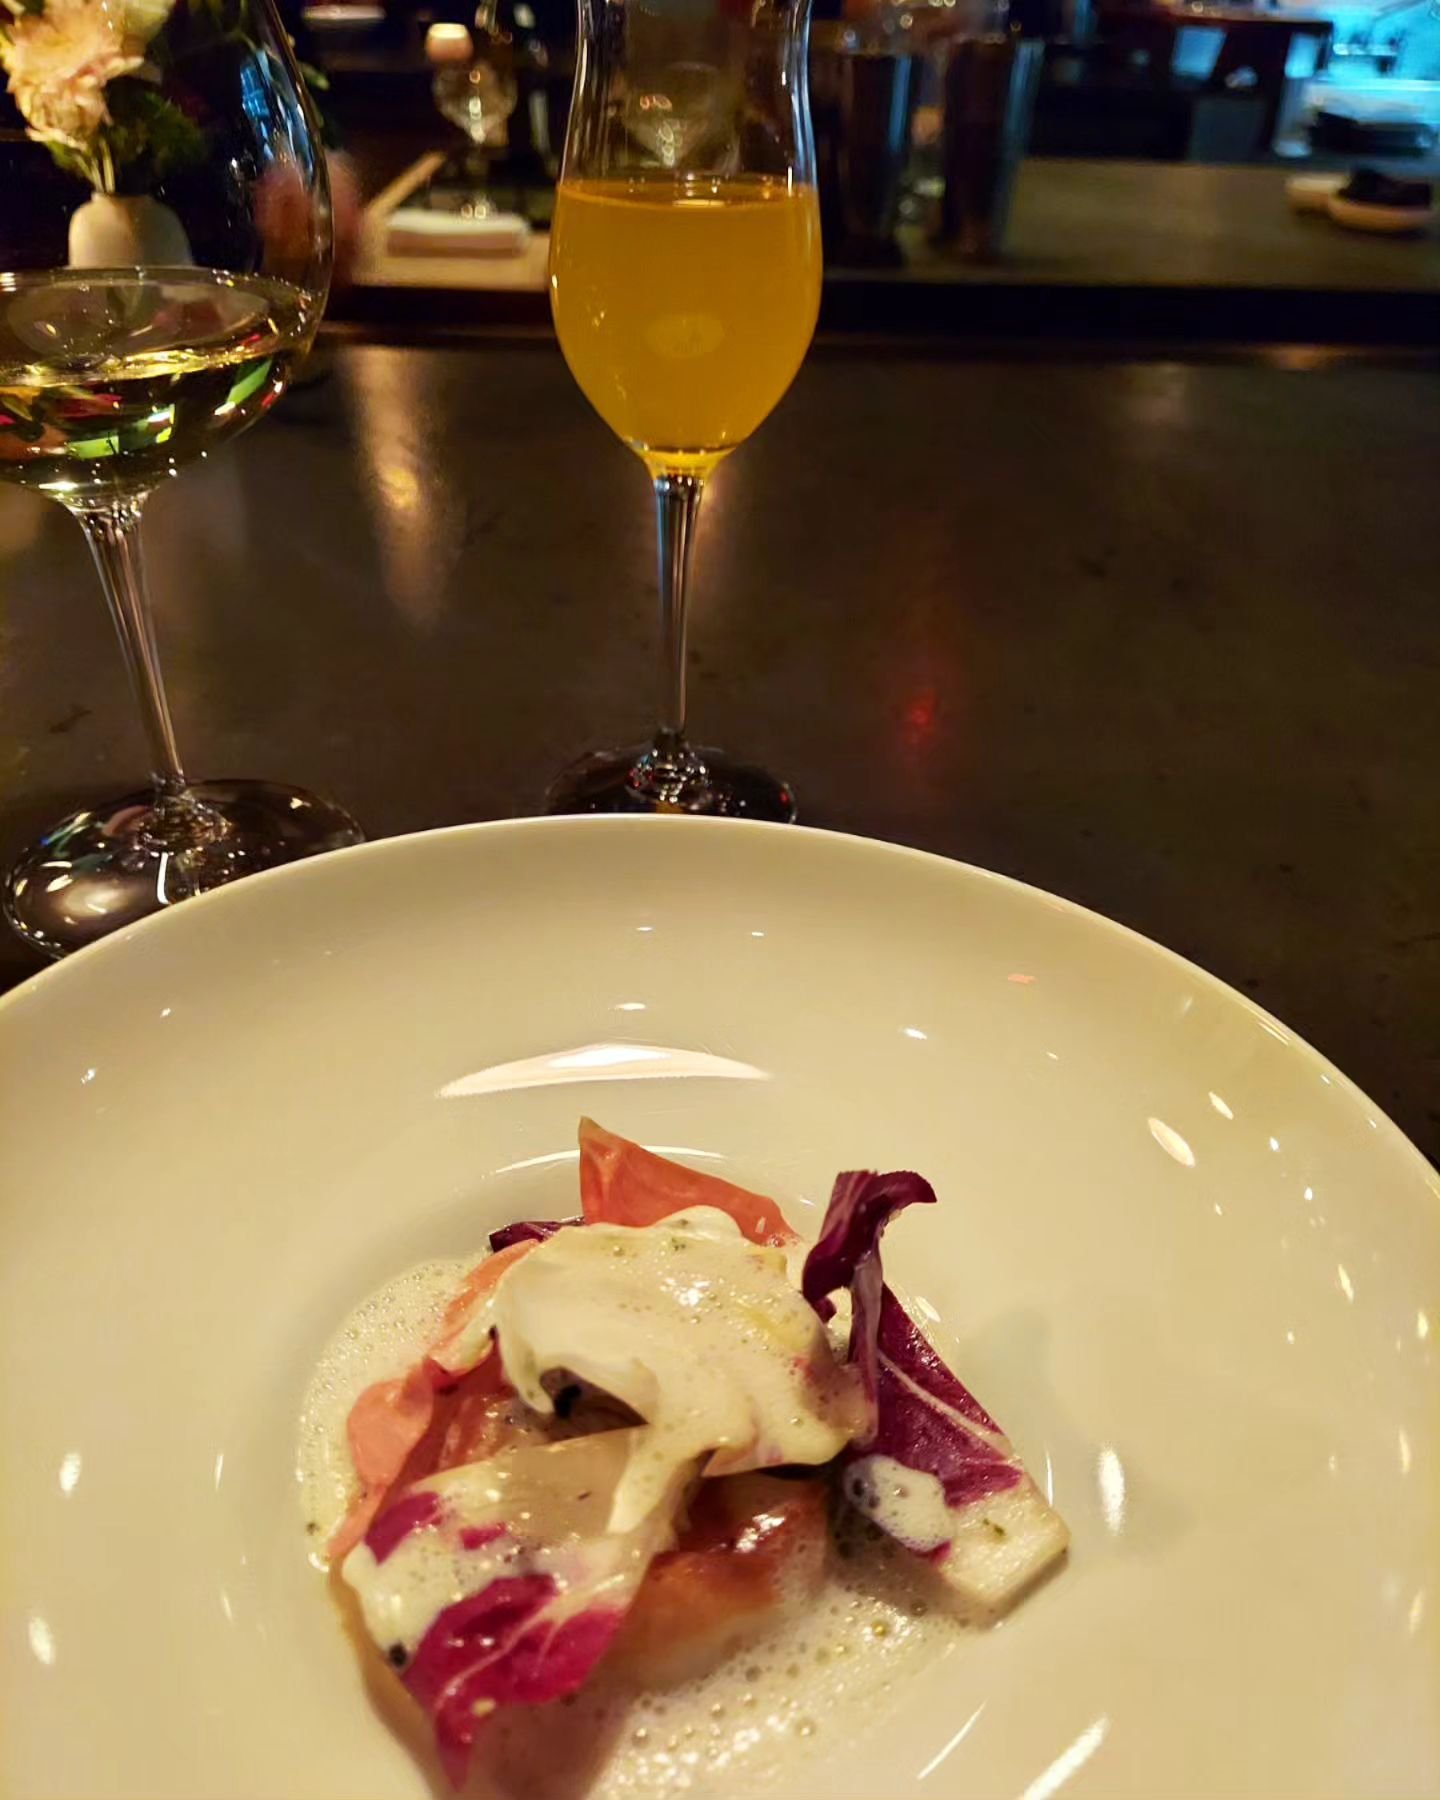 There's a first time for everything. When I heard that there was a temperance pairing (elevated term for mocktail pairing) for a tasting menu, I had to try it. 

The beverages were inventive and went well with each course. My favorite was the cote de